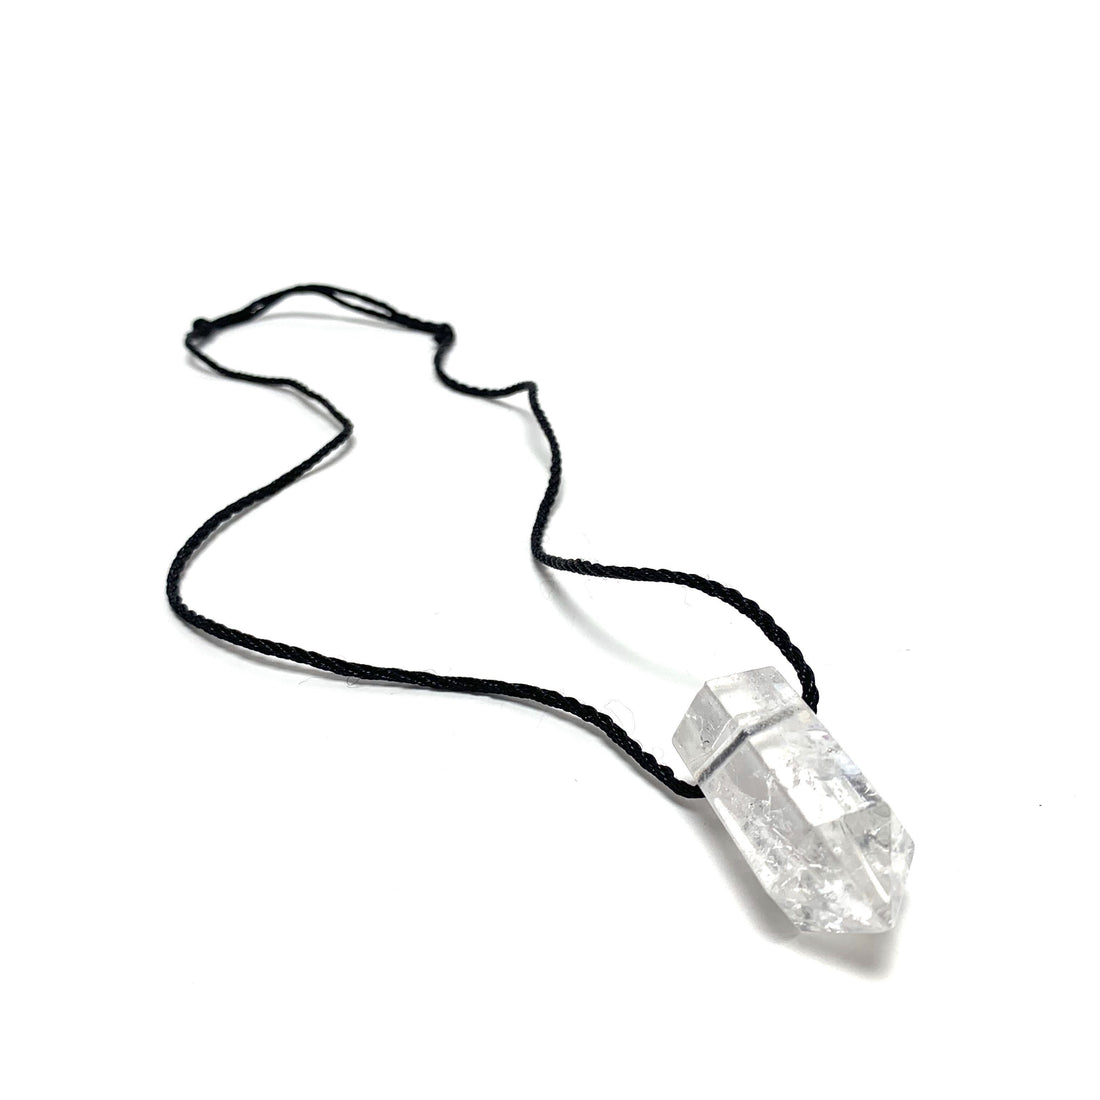 Clear Quartz Nylon Cord Necklace Necklaces Crystals A. $22.00 Polished Point 